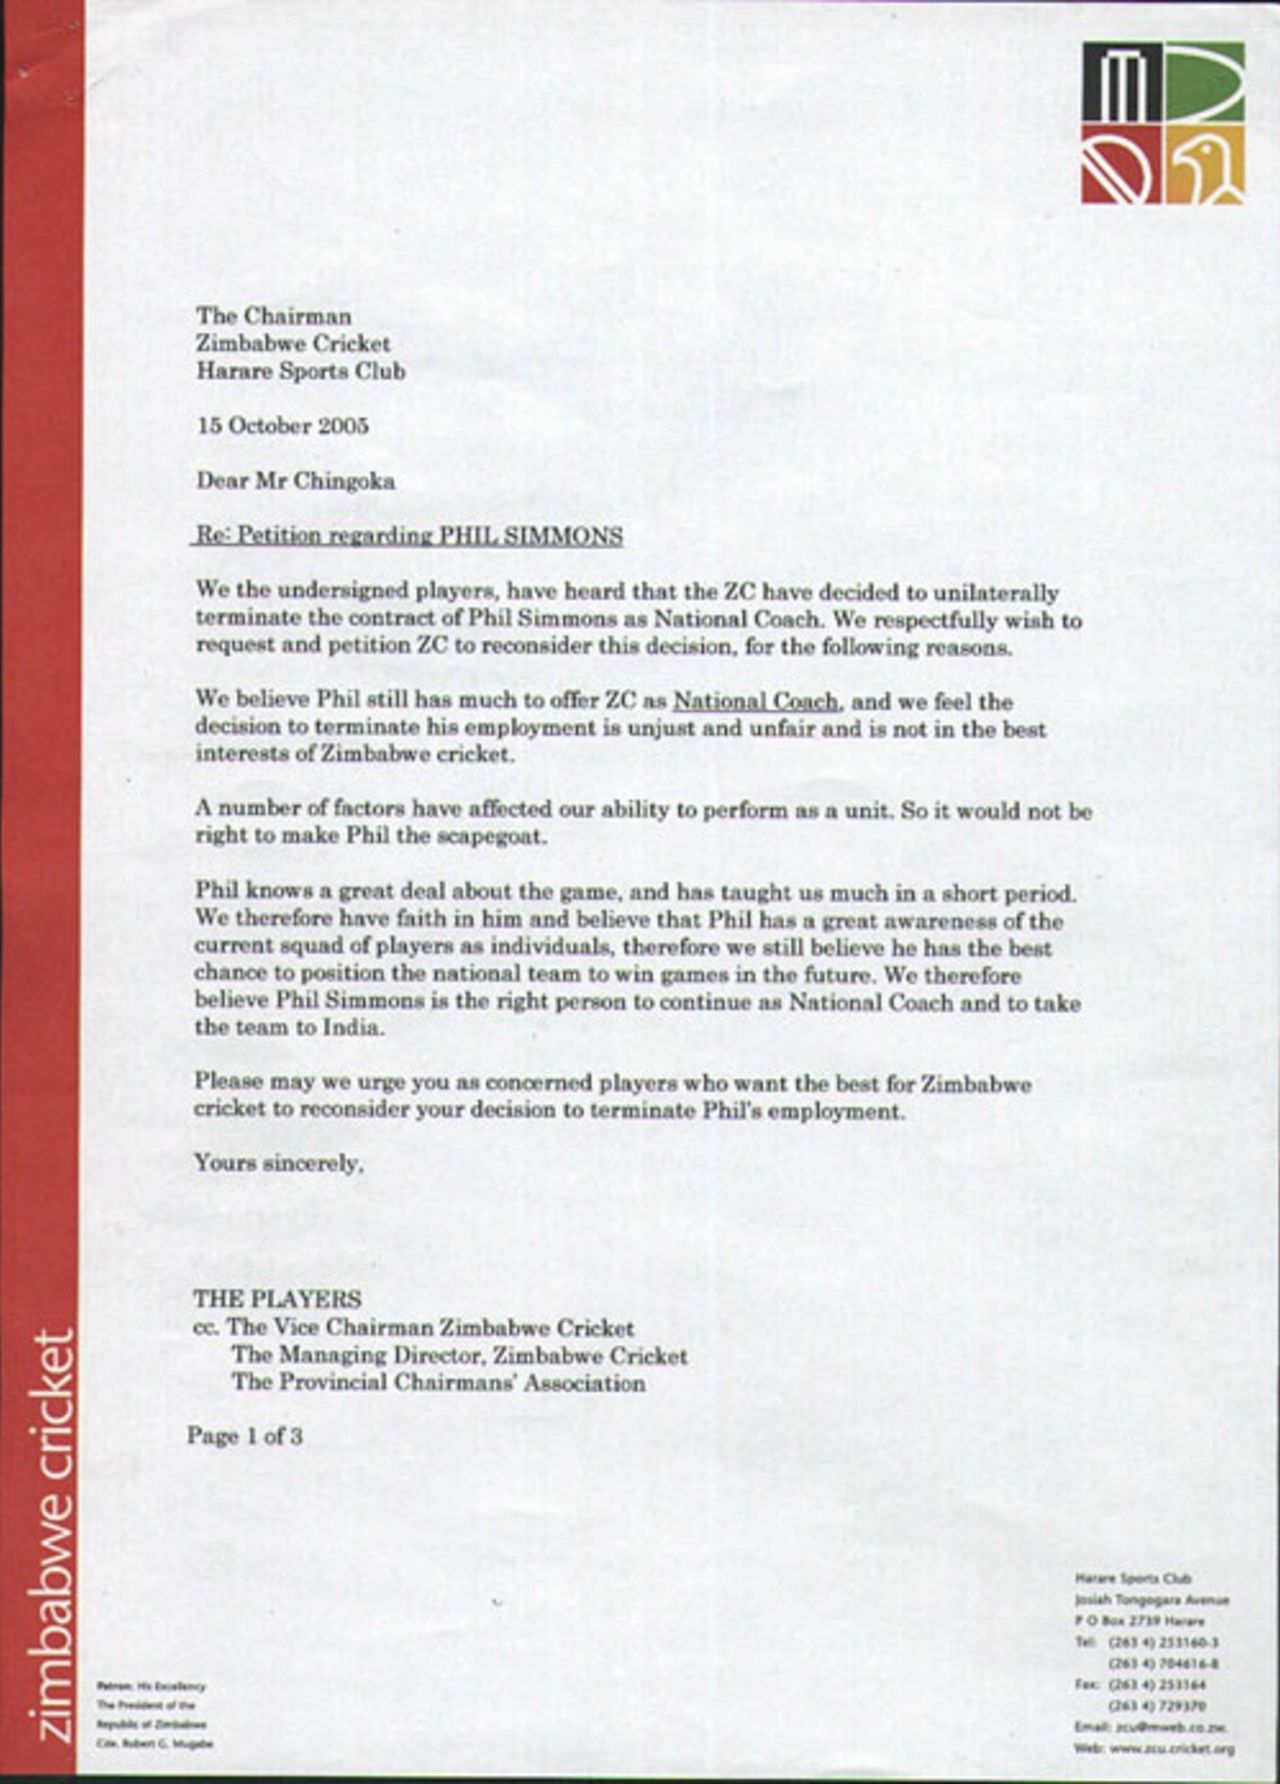 Letter from Zimbabwe played petitioning for the reinstatement of Phil Simmons after he was sacked as Zimbabwe coach, October 15, 2005